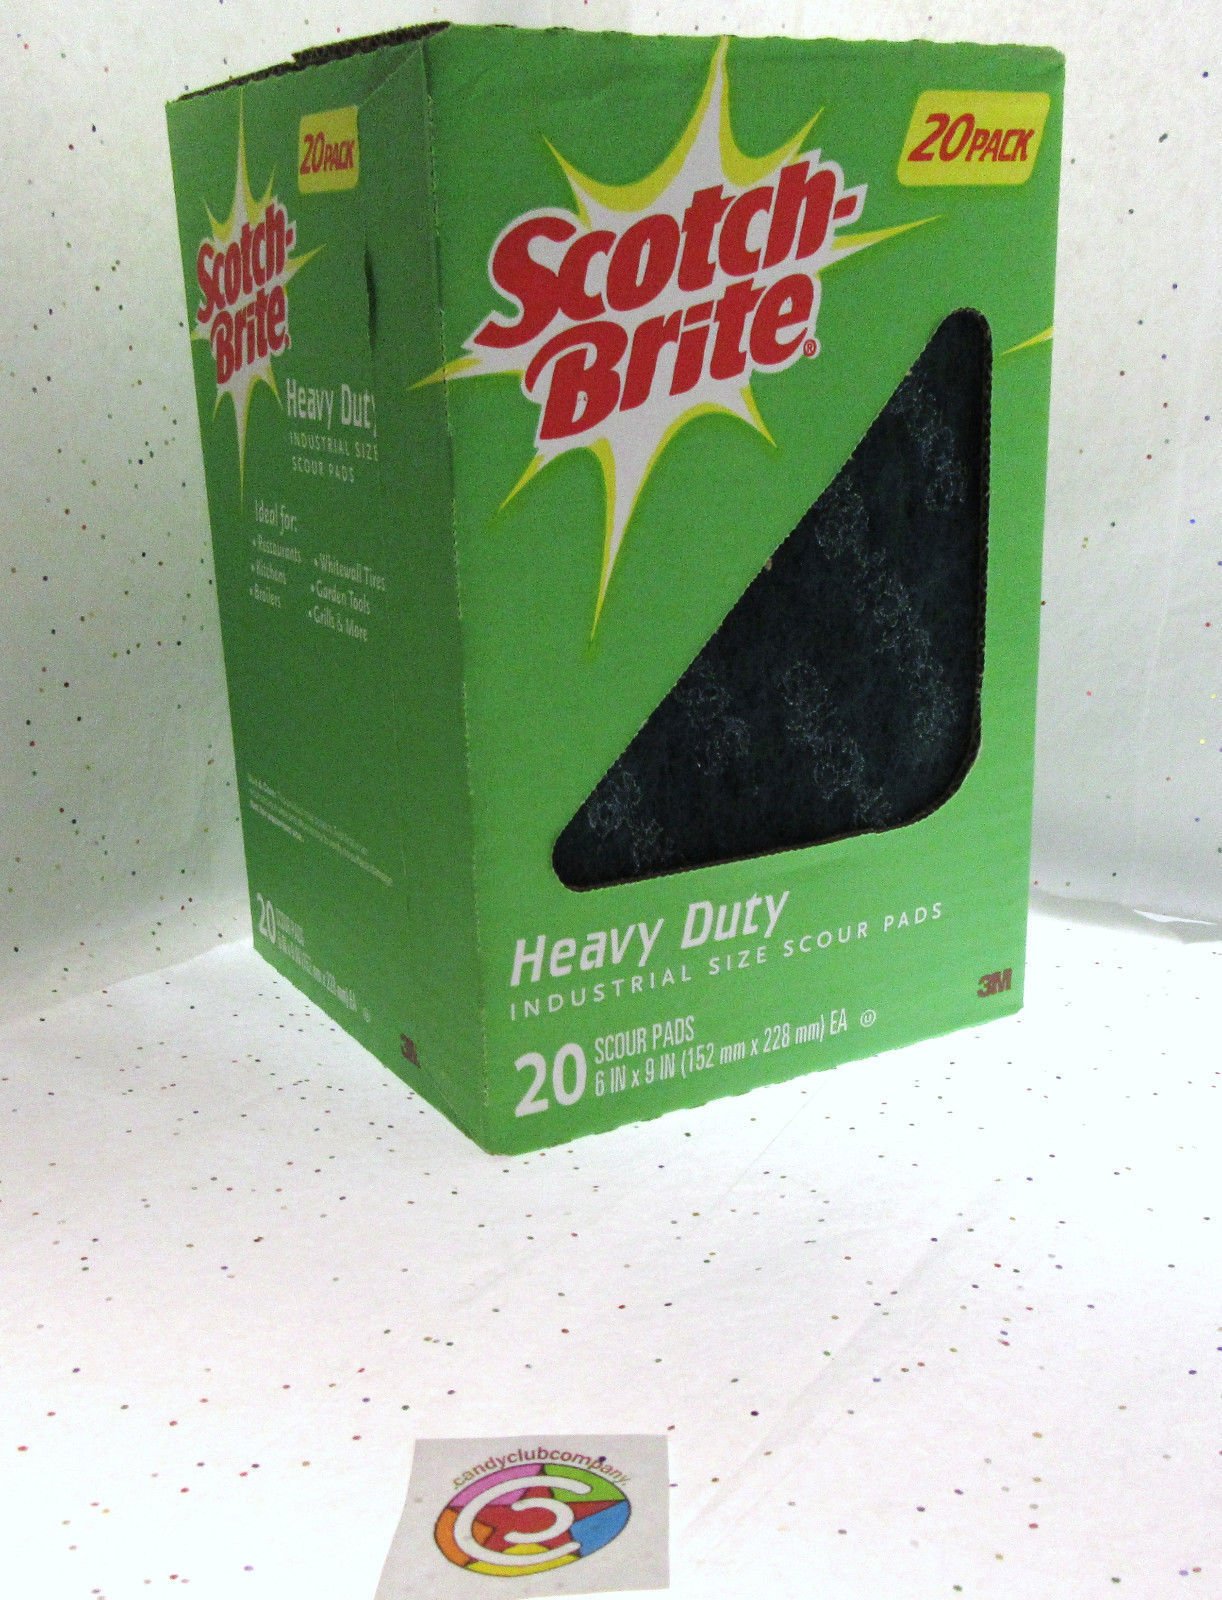 Scotch Brite Heavy Duty Industrial Size Box of 20 Scour Pads 6"x9" ~ Lot of 4